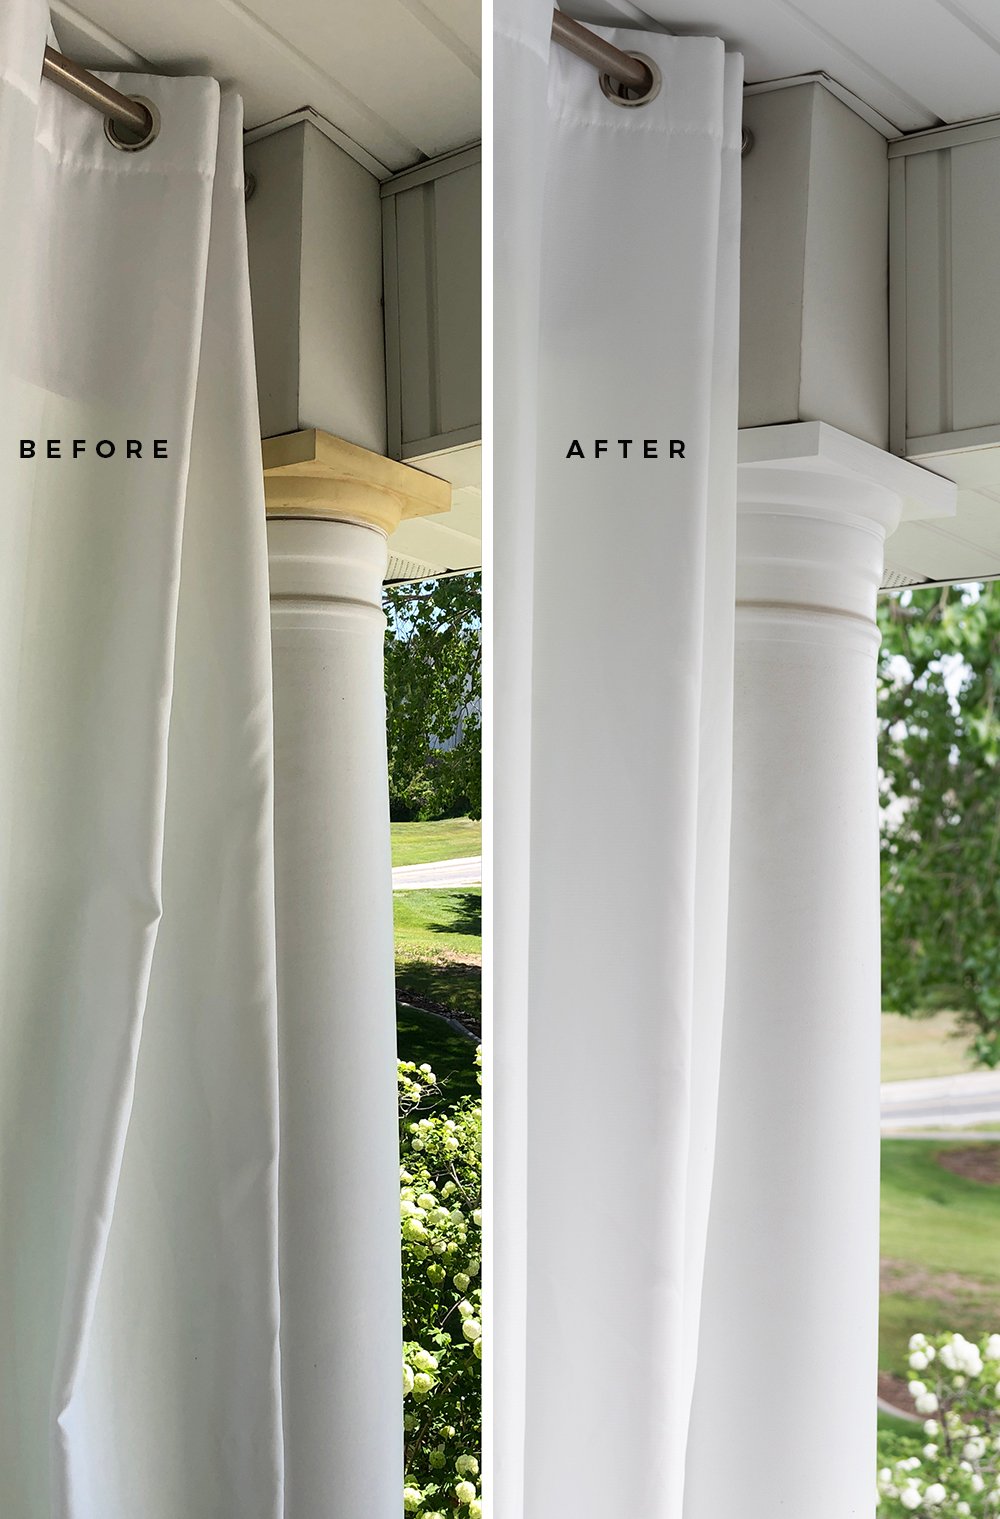 Painting Our Balcony Columns - roomfortuesday.com